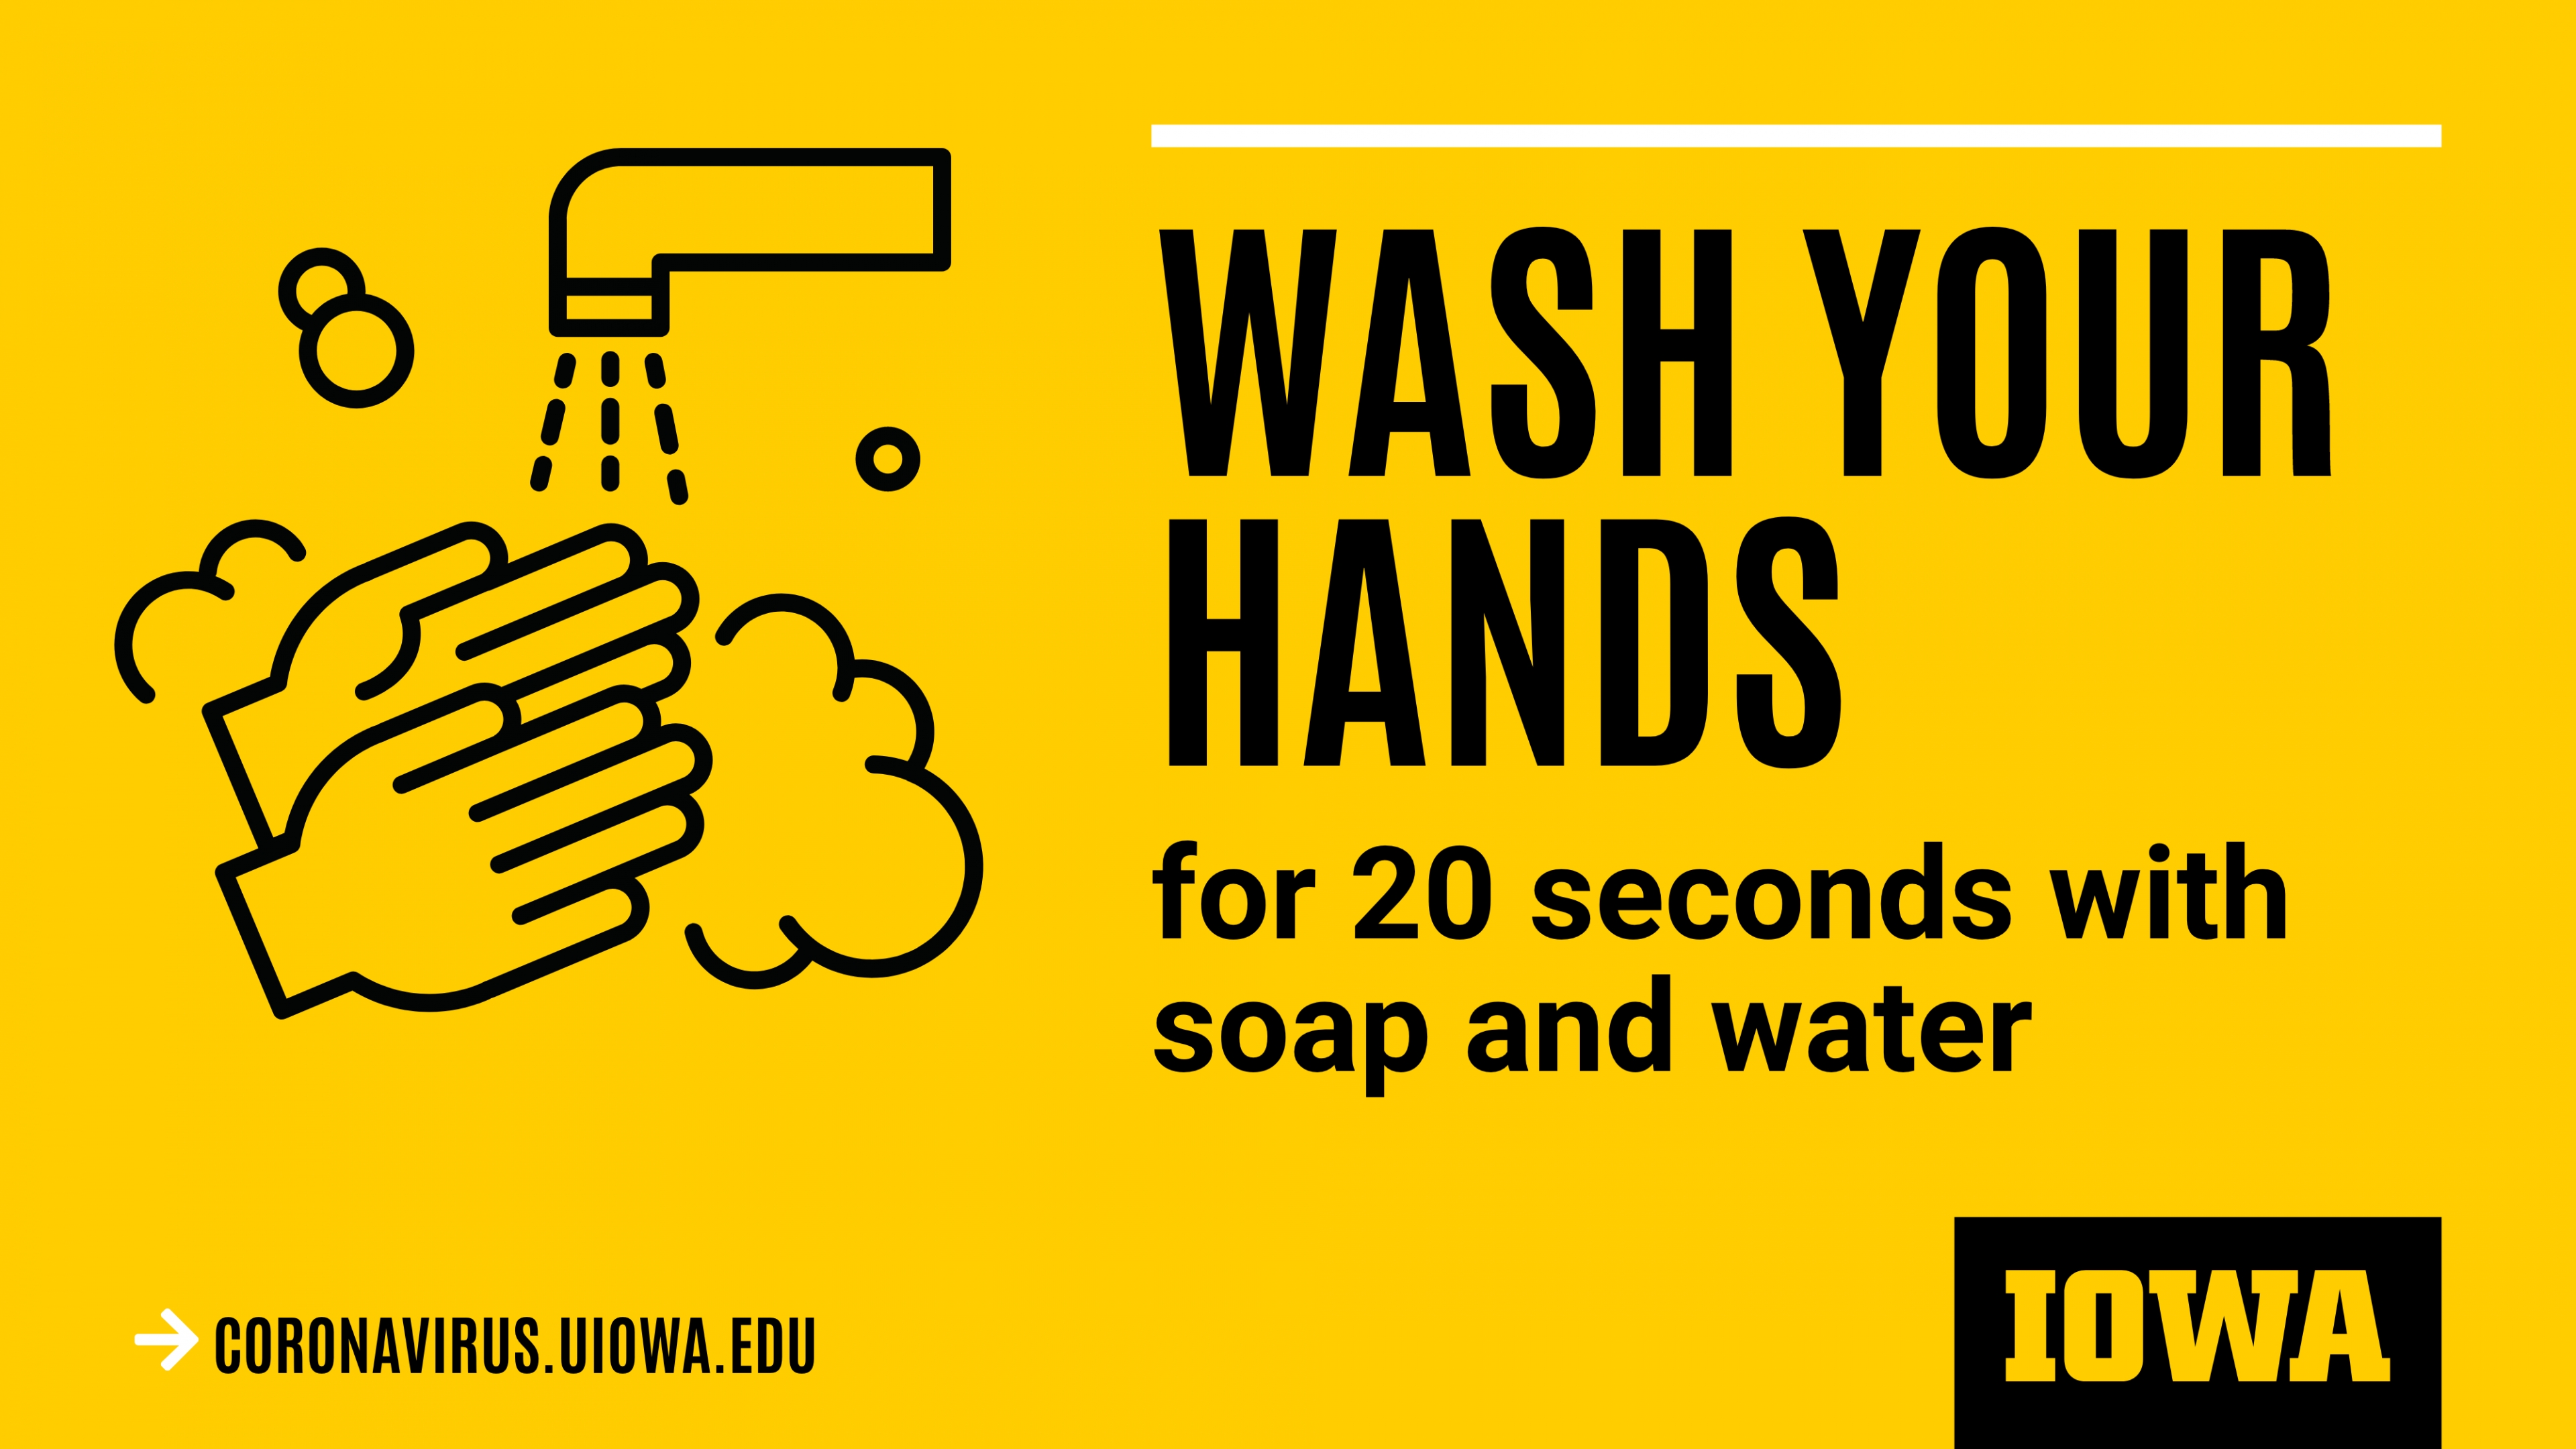 Wash your hands for 20 second with soap and water